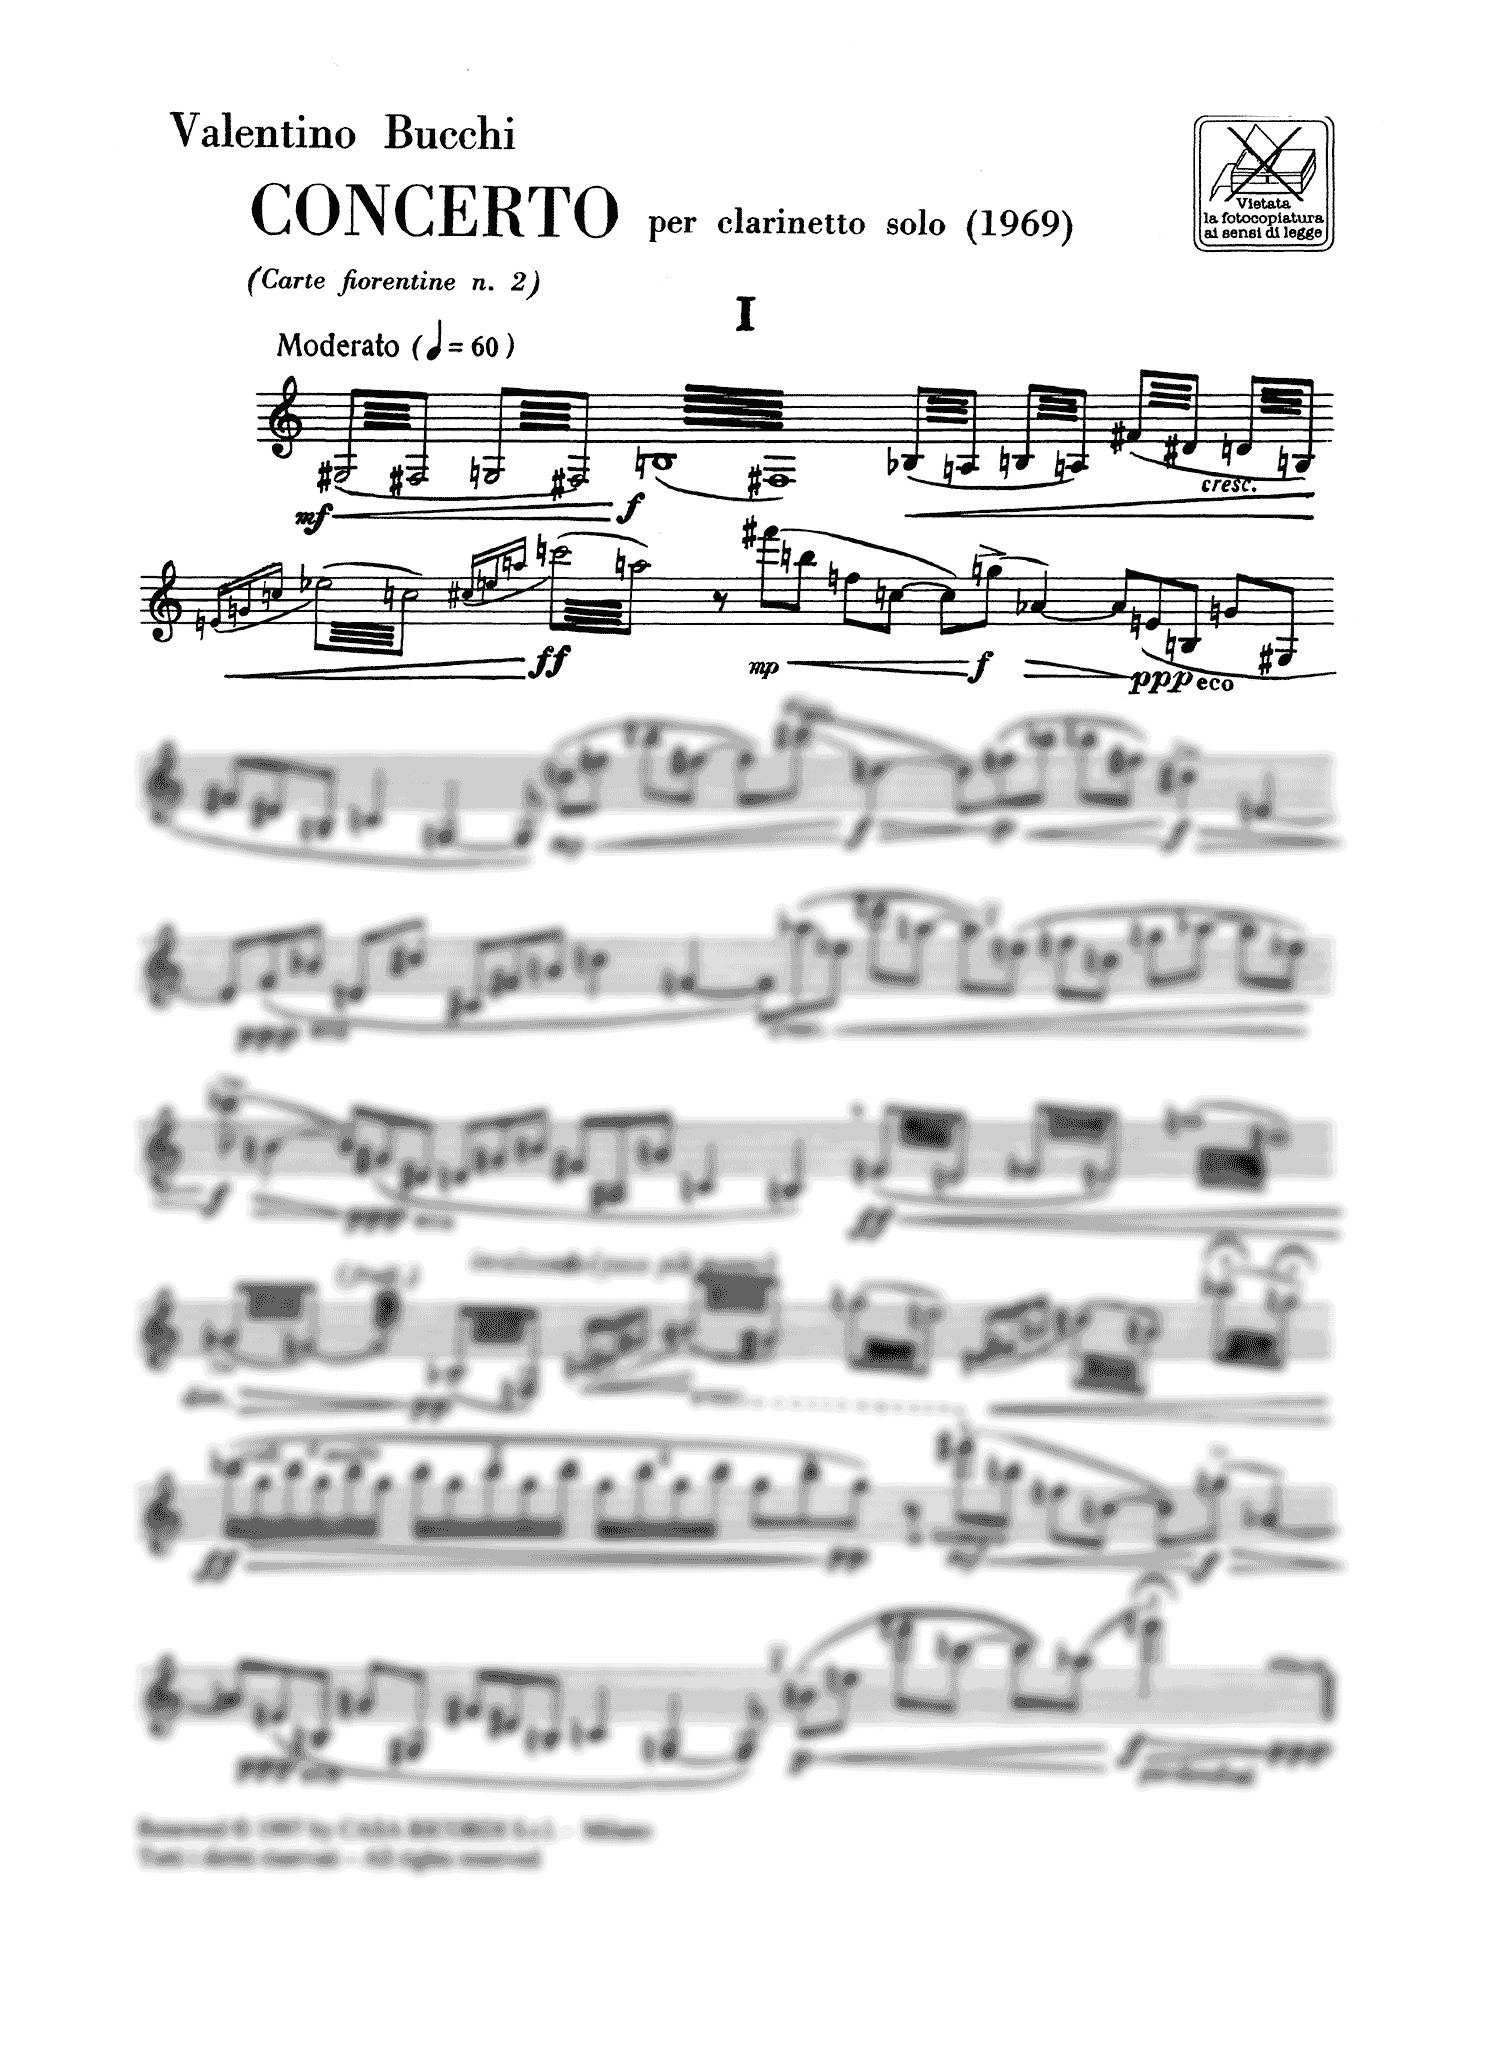 Bucchi Concert for solo clarinet - Movement 1